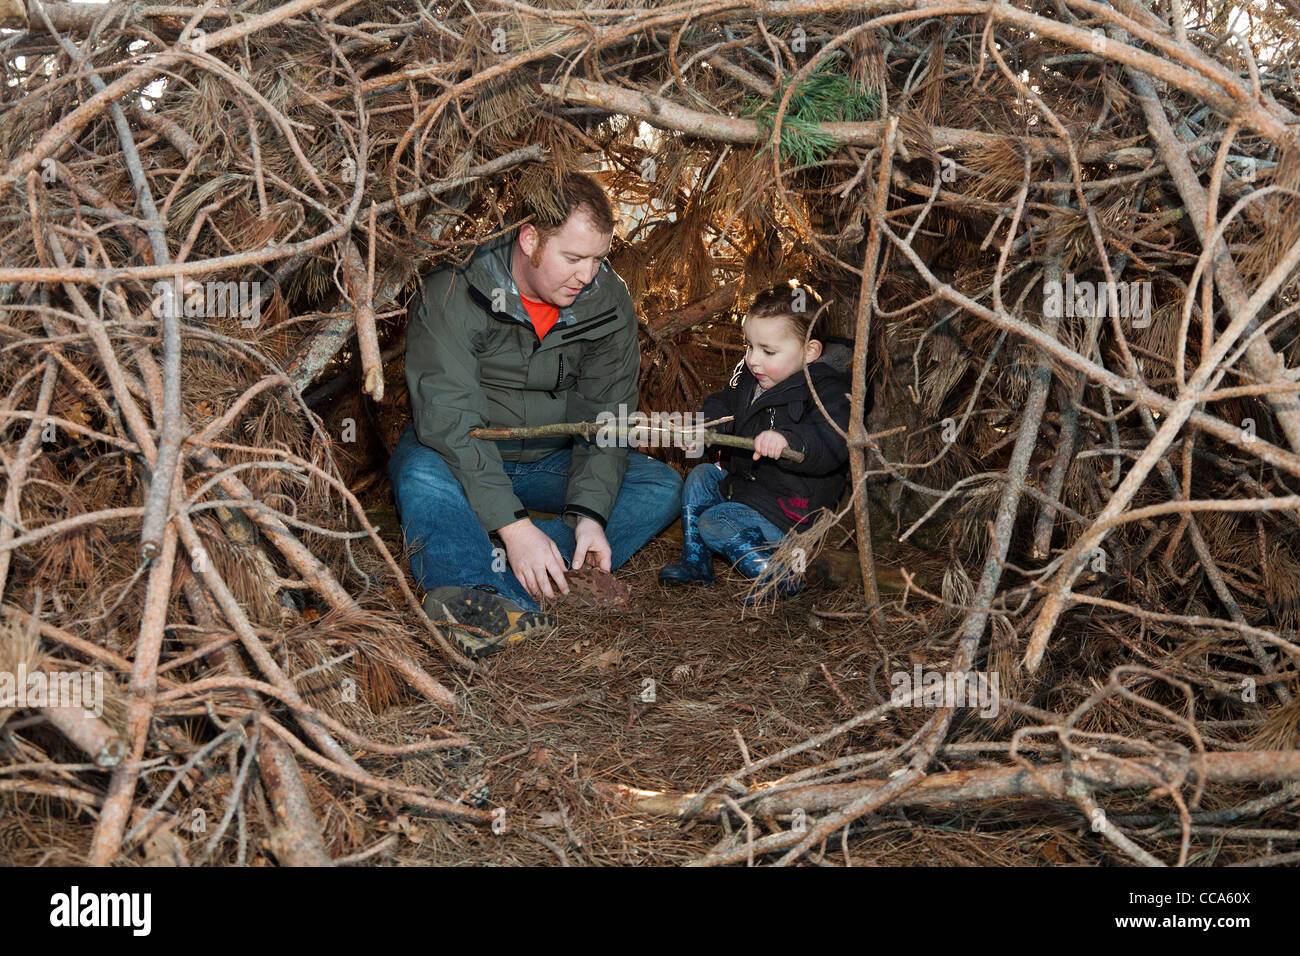 Father and son playing together in a hide-away camp den made from branches, sticks and wood from the forest Stock Photo